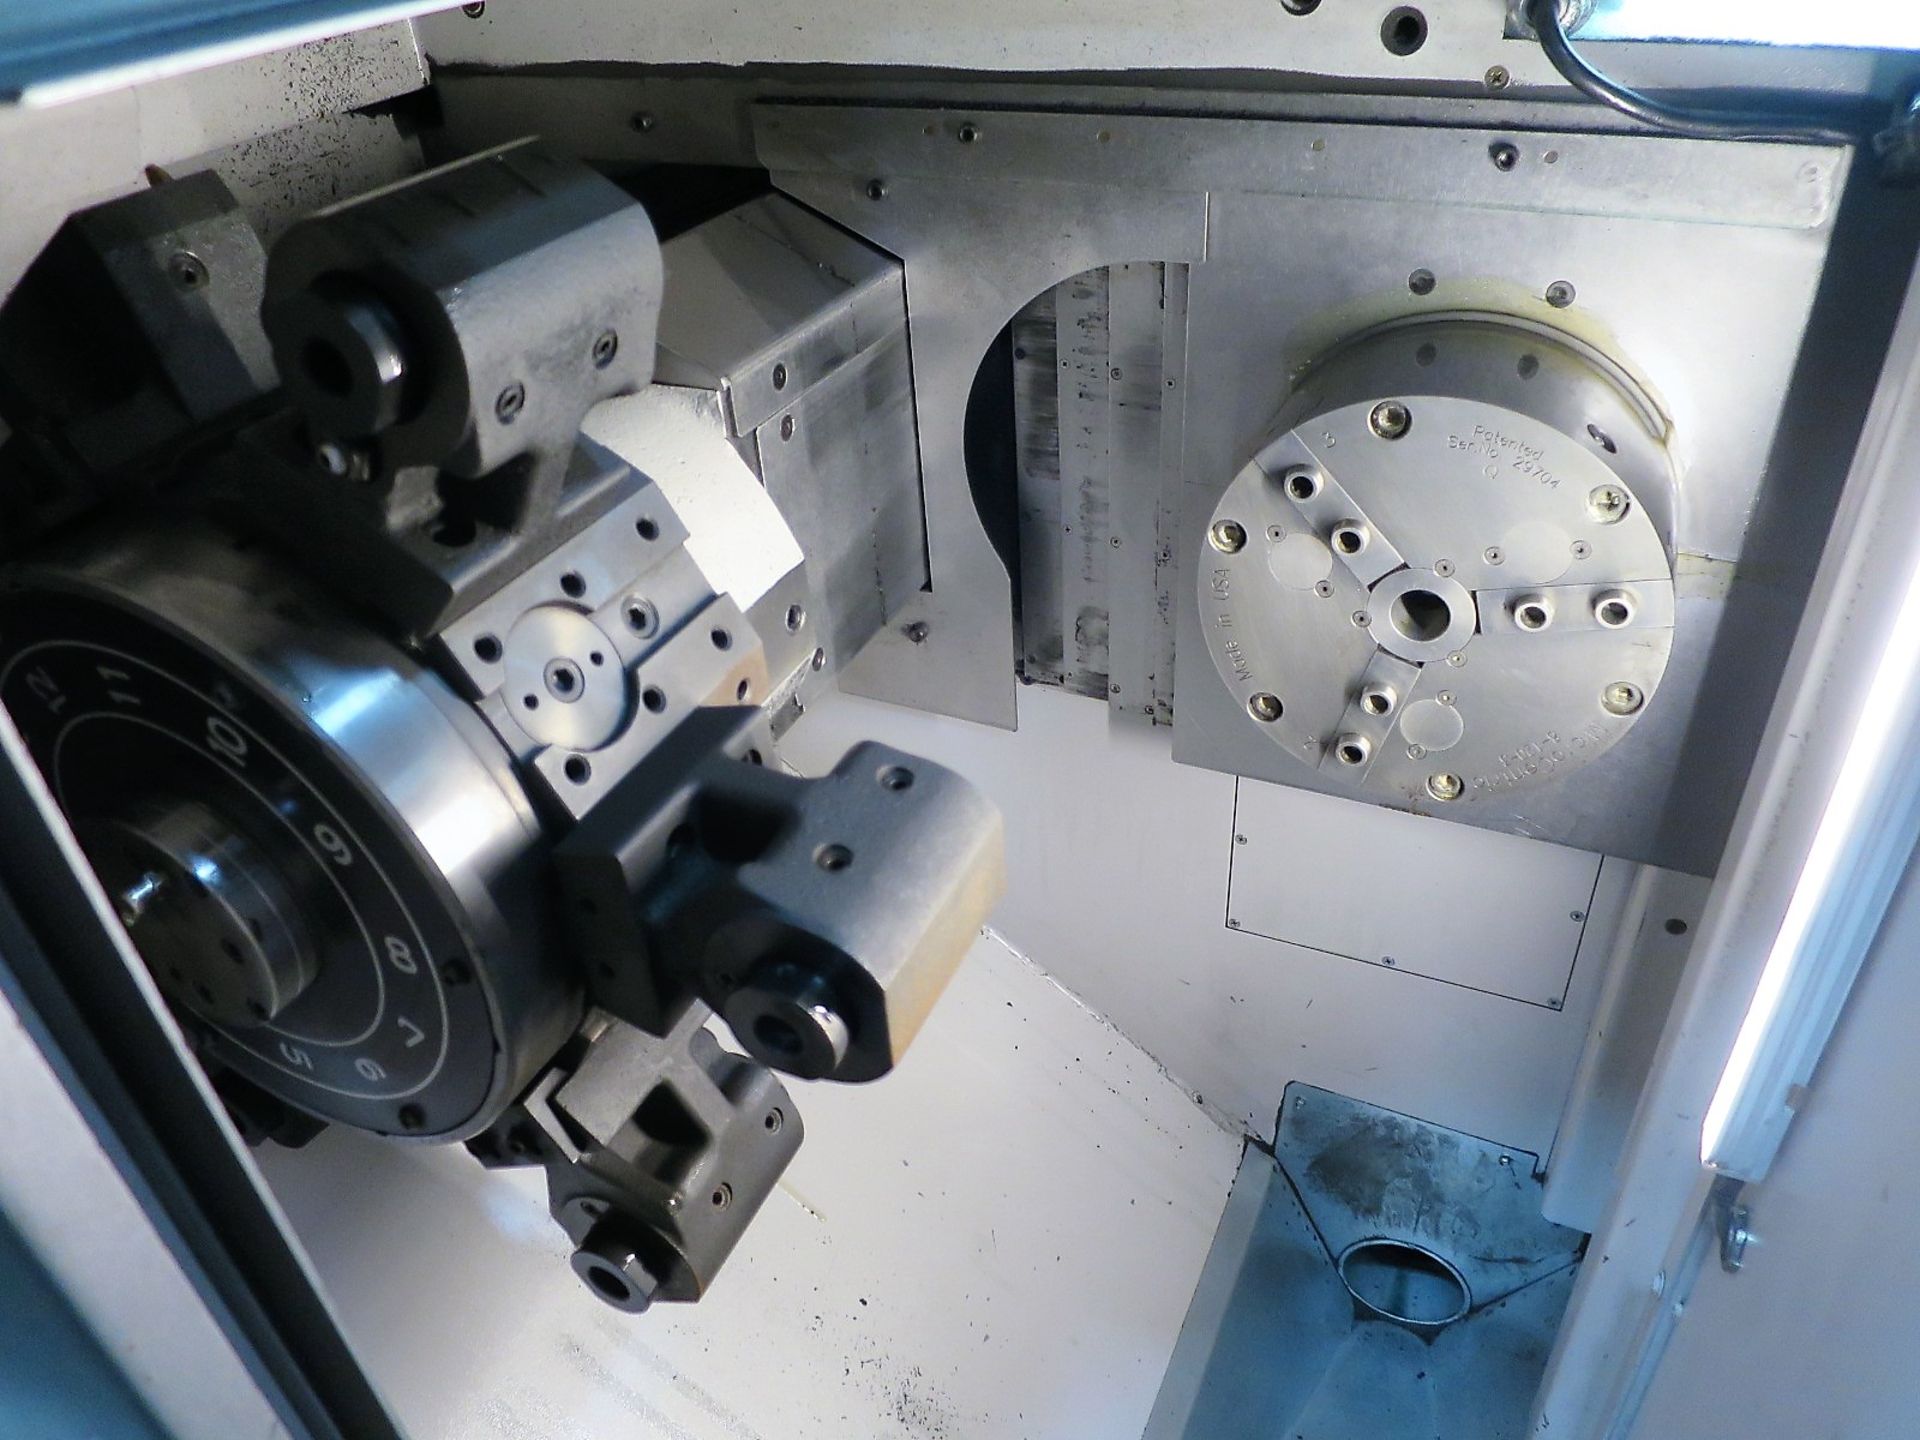 Okuma 2SP-150HM Twin Spindle 3-Axis Turning Center w/Live Milling, S/N 2SP-150HM, New 2011 - Image 4 of 12